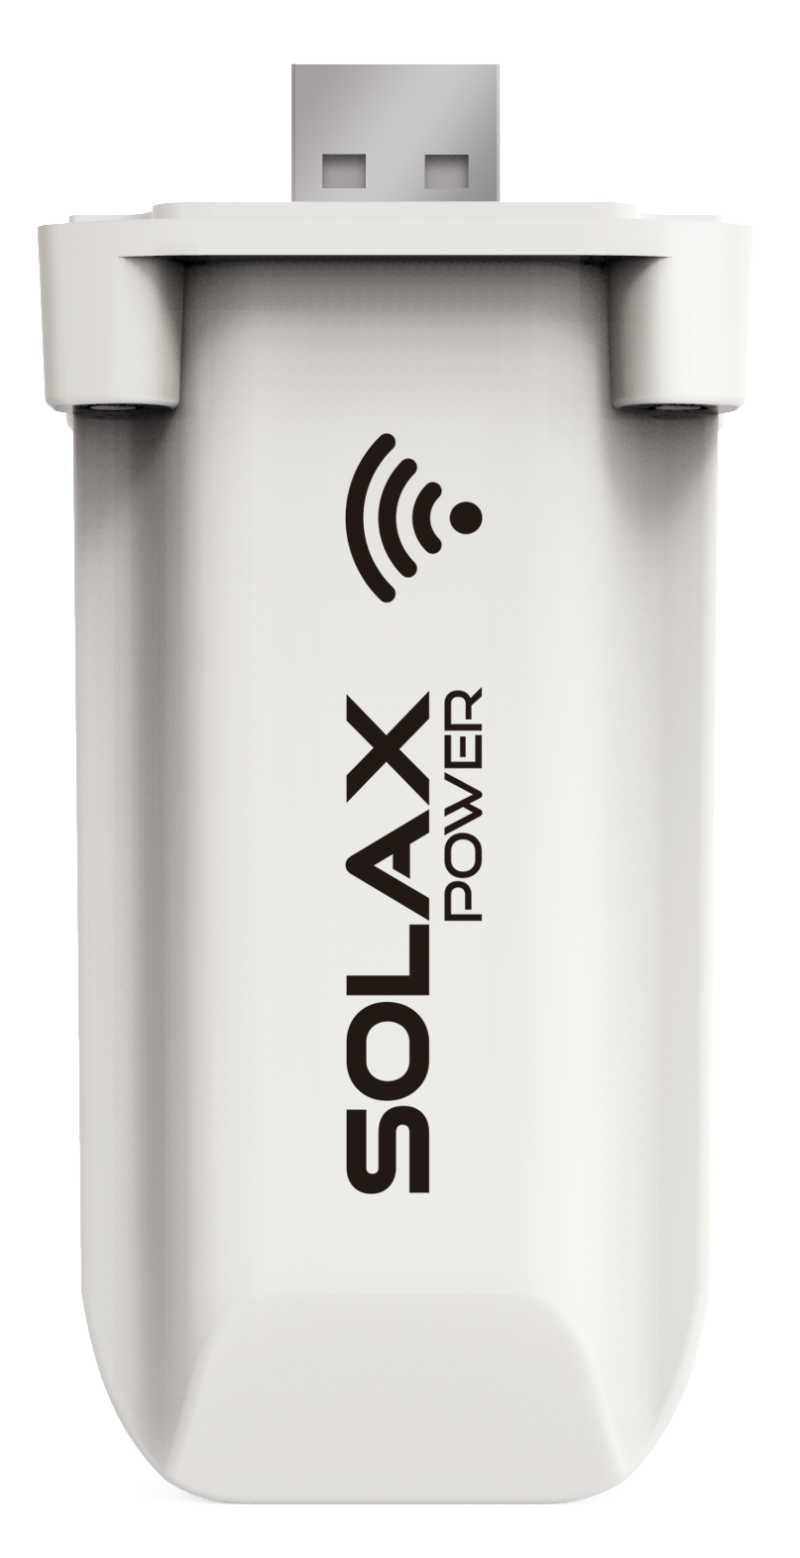 POCKET WI-FI DONGLE FOR X1 INVERTERS